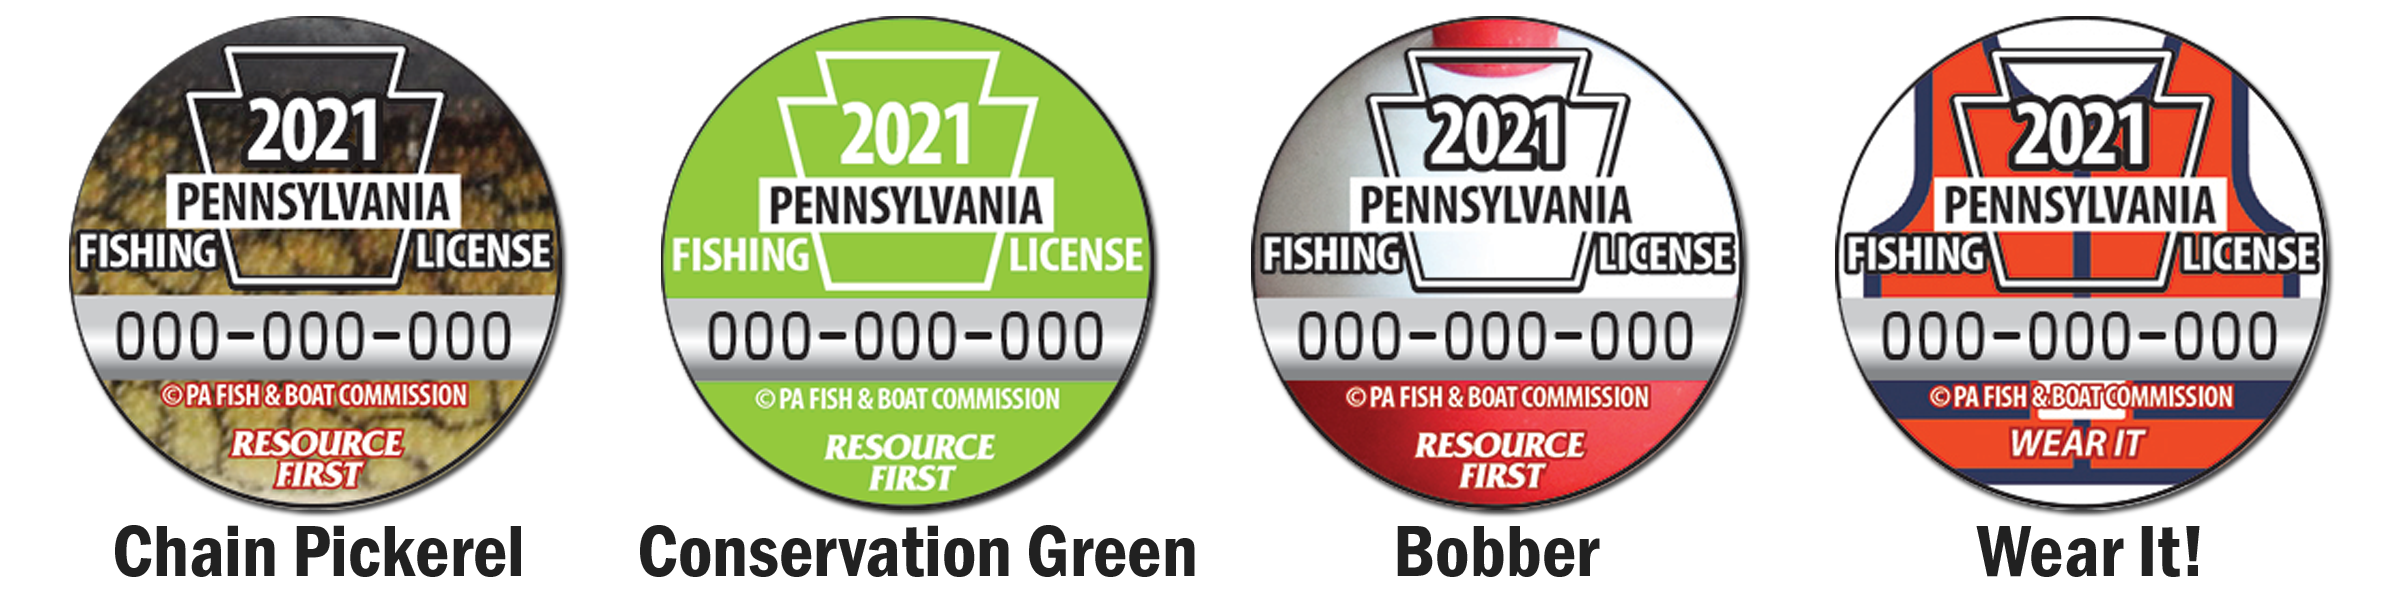 https://www.media.pa.gov/SiteAssets/Lists/Fish%20and%20Boat%20Commission/NewForm/License%20Button%20Designs%20Combo.png